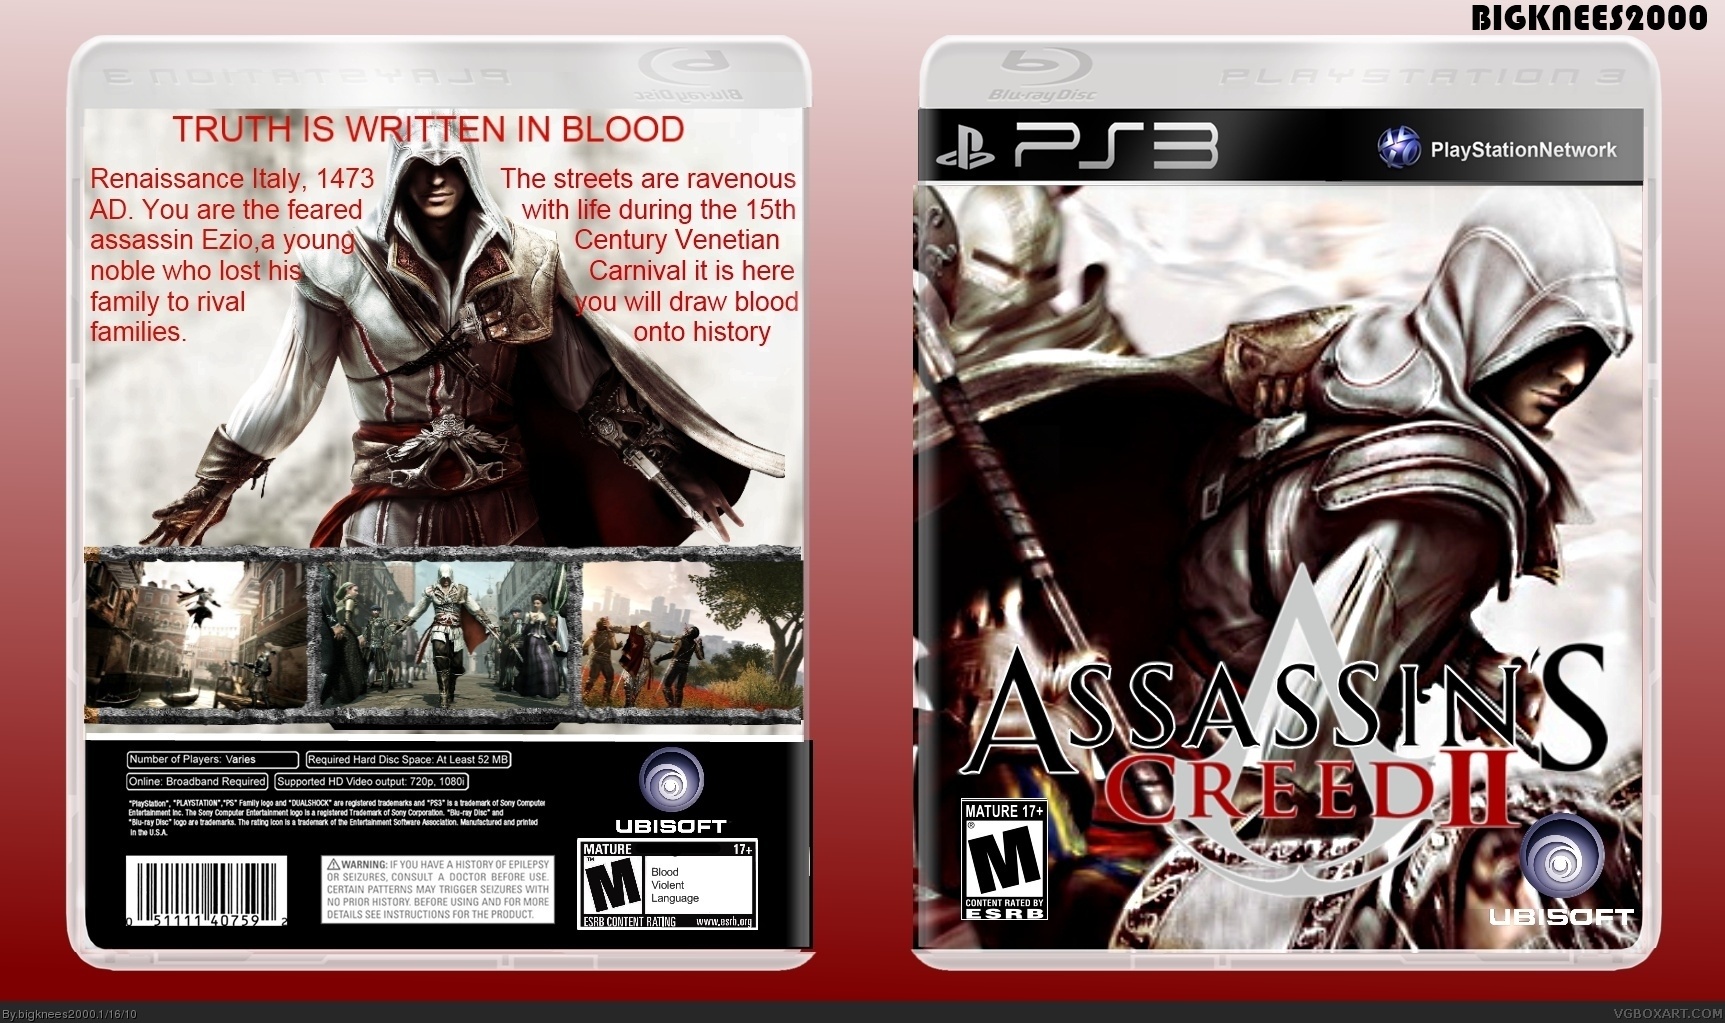 Viewing full size Assassin's Creed 2 box cover